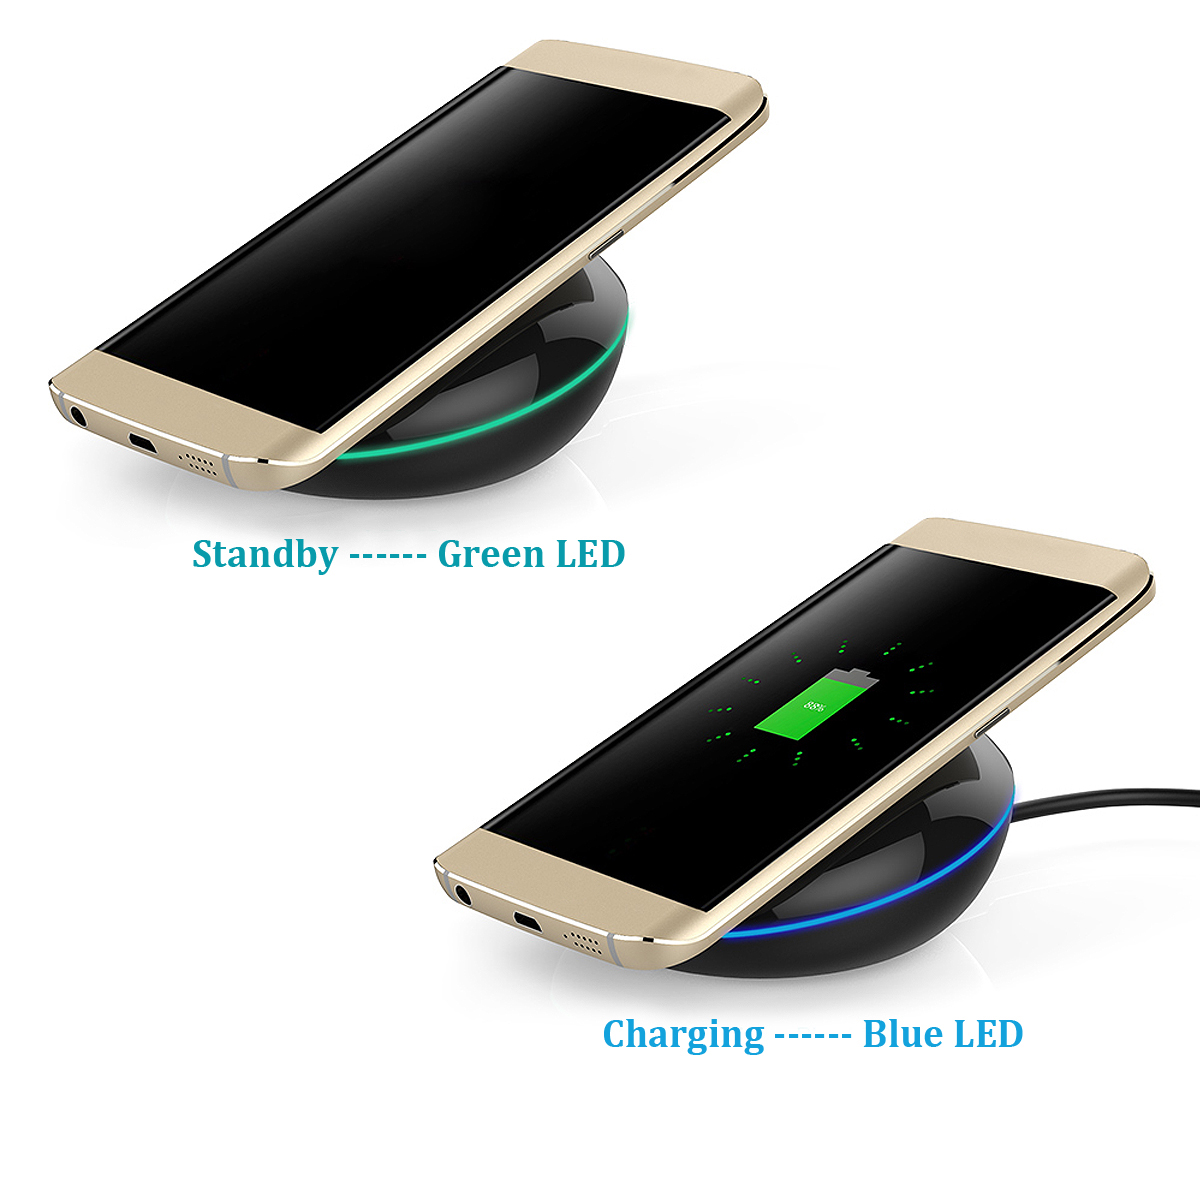 Bakeey-Qi-Wireless-Fast-Charger-With-LED-Indicator-For-iPhone-X-8Plus-Samsung-S7-S8-Note-8-1217829-4